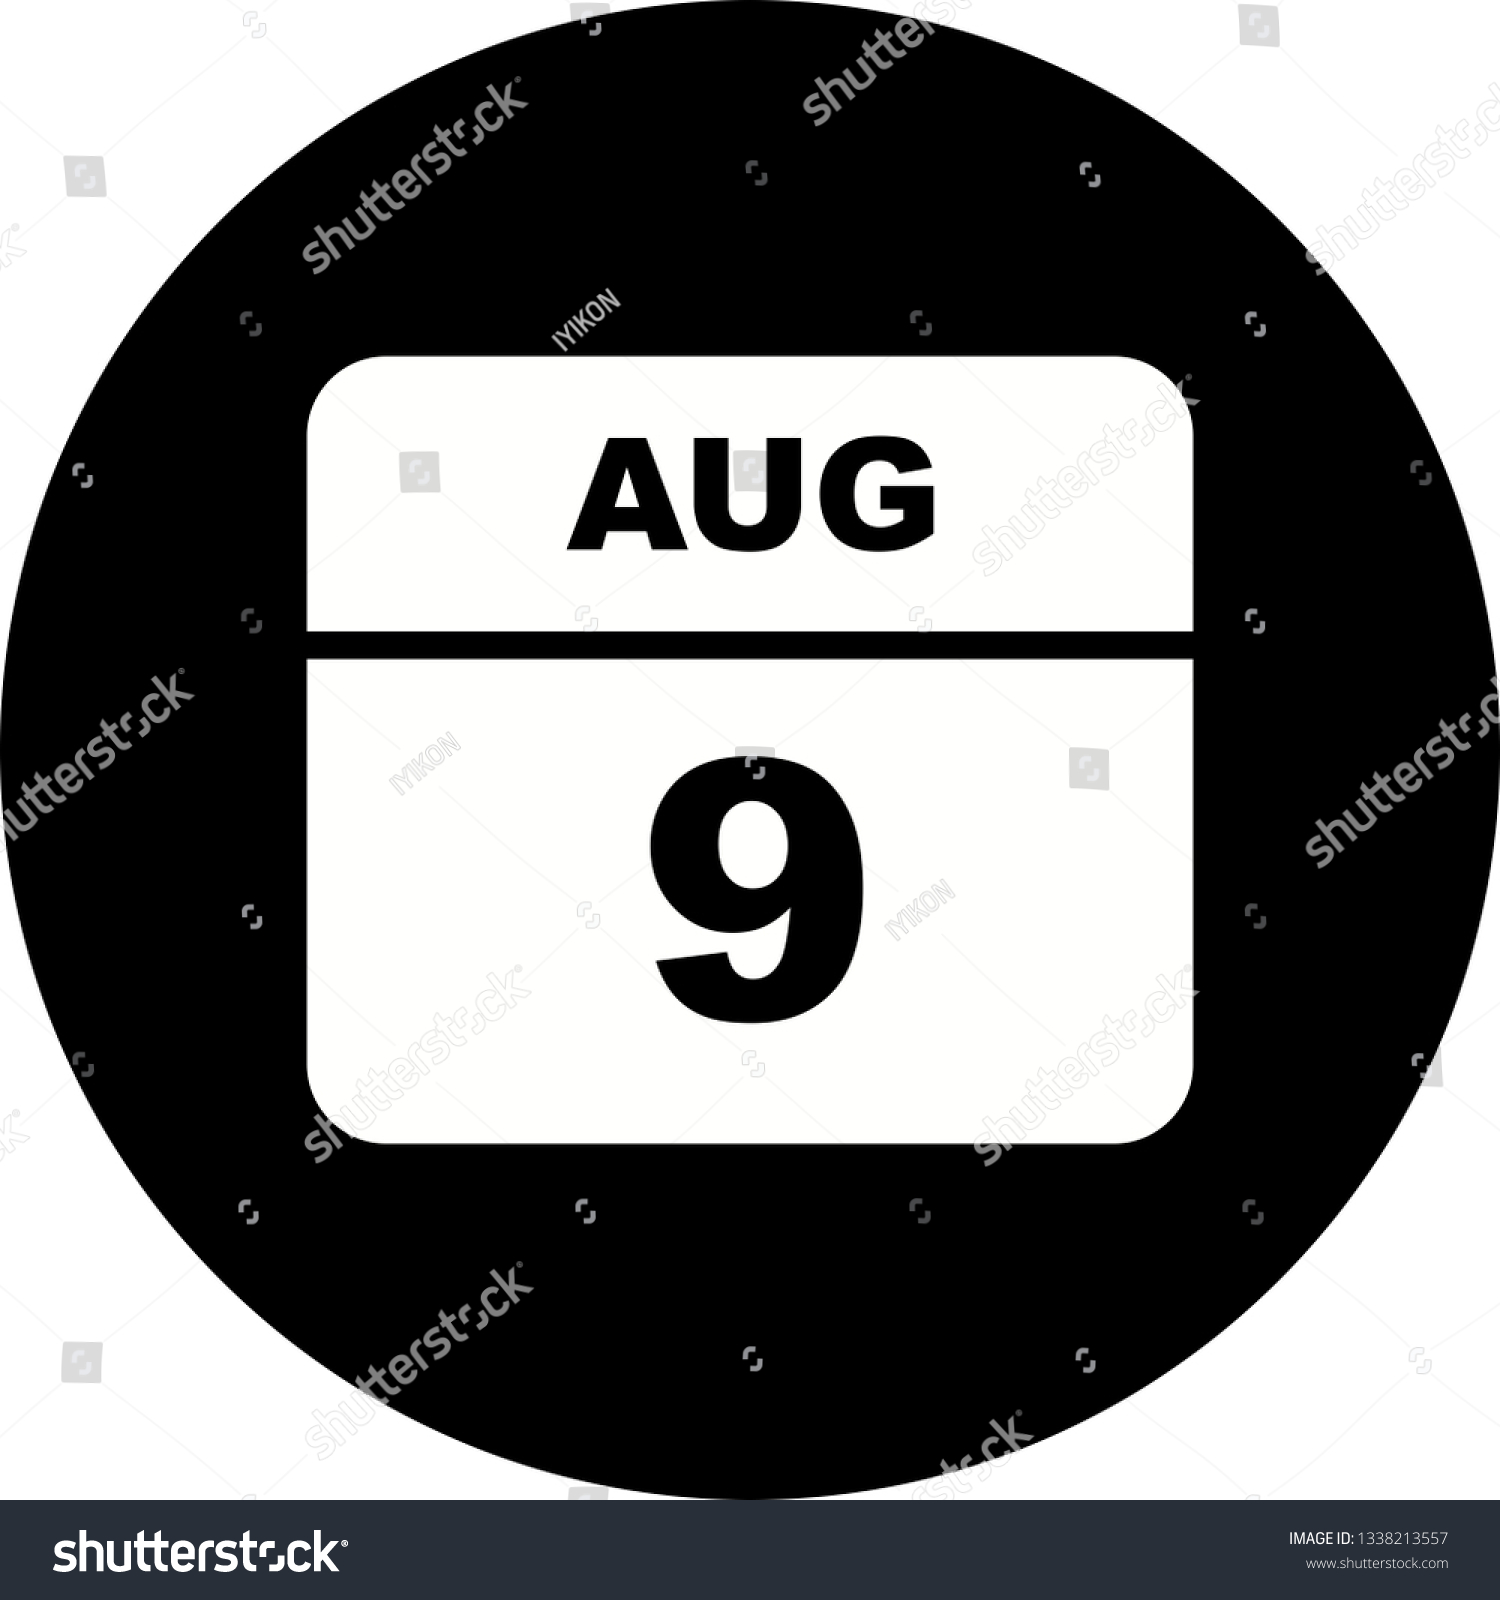 August 9th Date On A Single Day Calendar Royalty Free Stock Vector